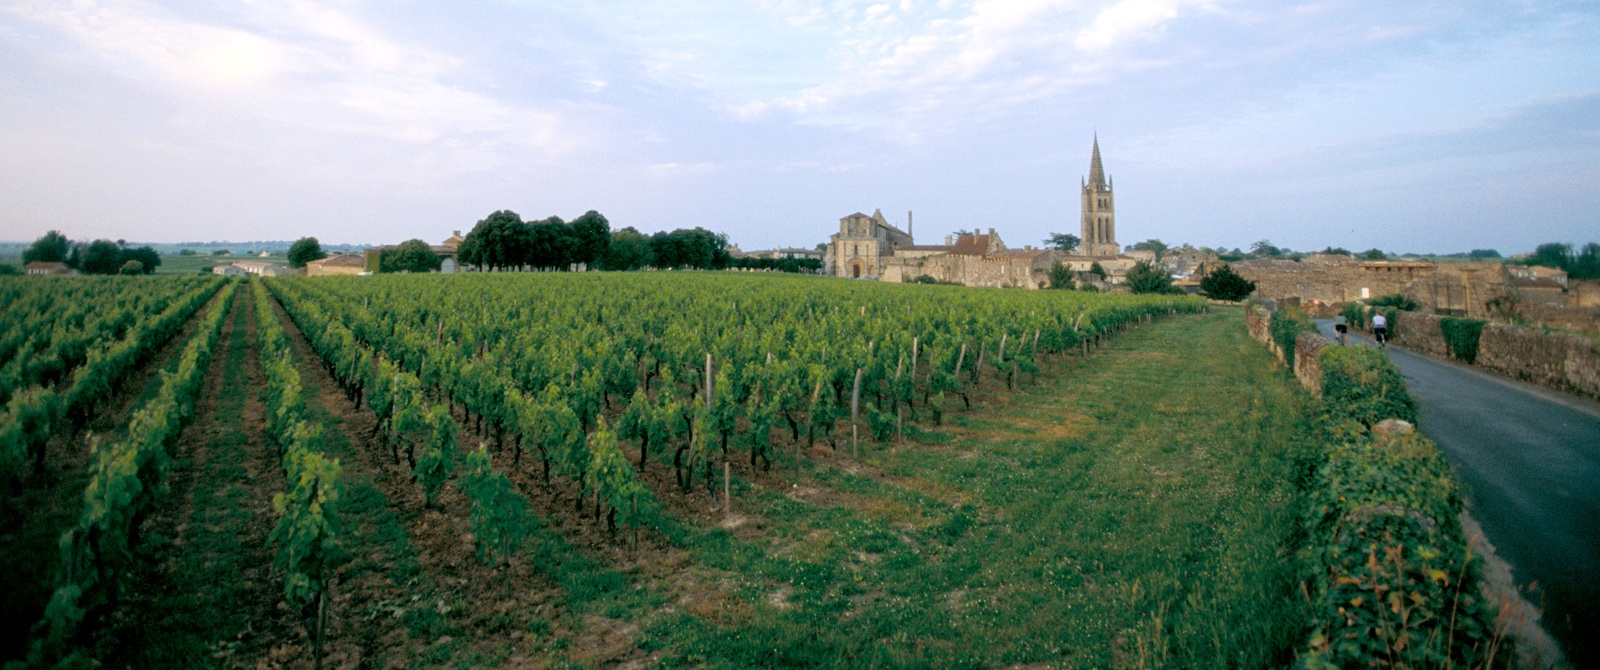 Join Trek Travel and AmaWaterways on a Bordeaux River Cruise bike trip